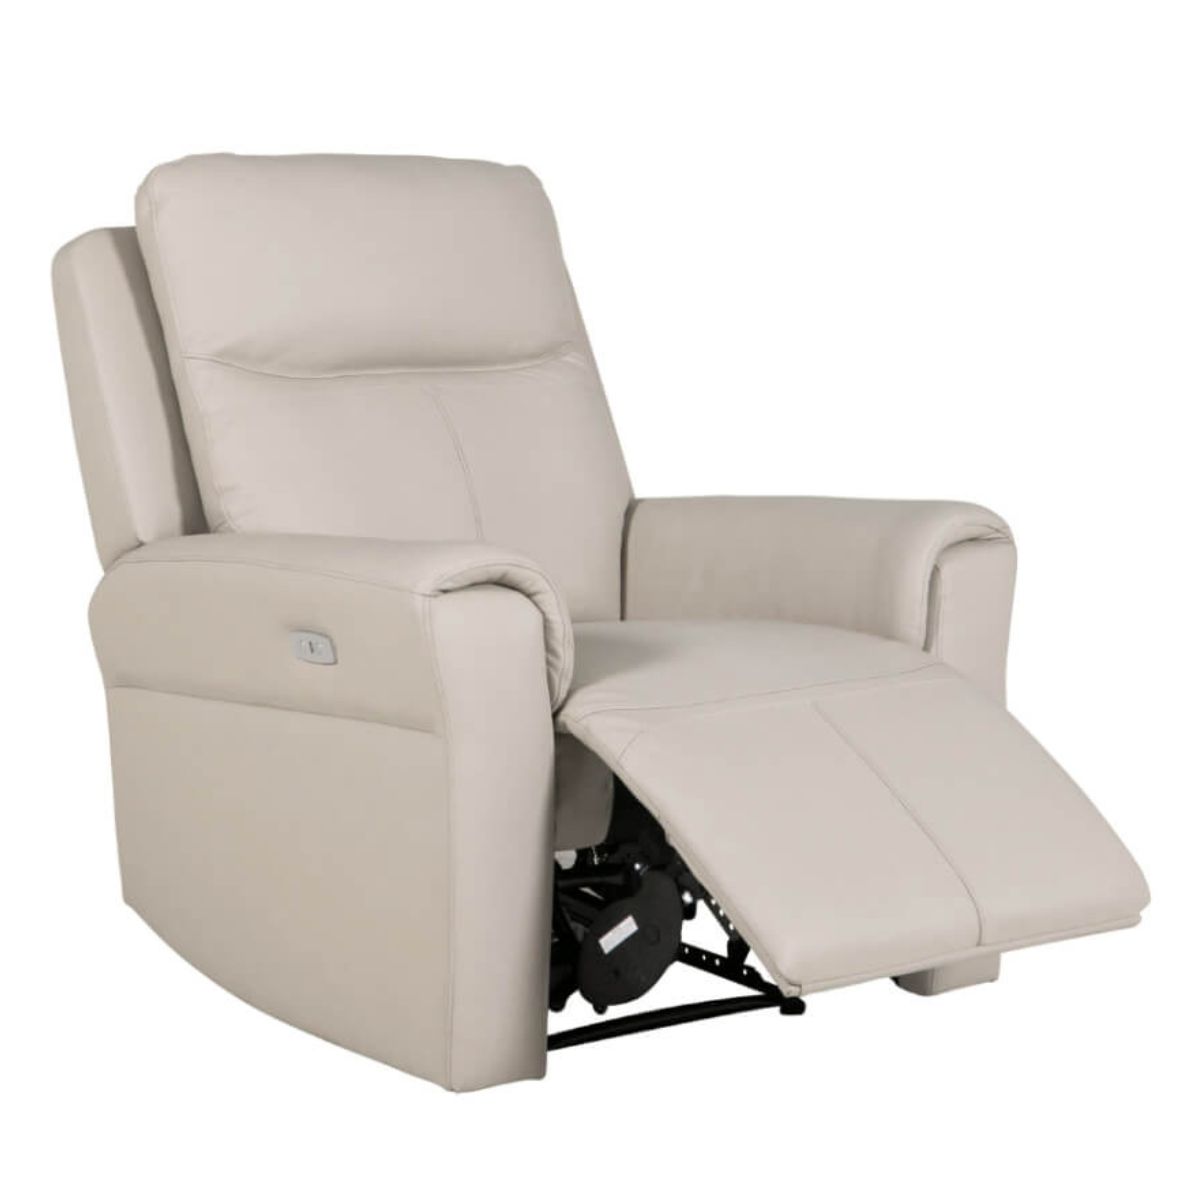 Rosslare Leather Electric Recliner Armchair Beige - 1